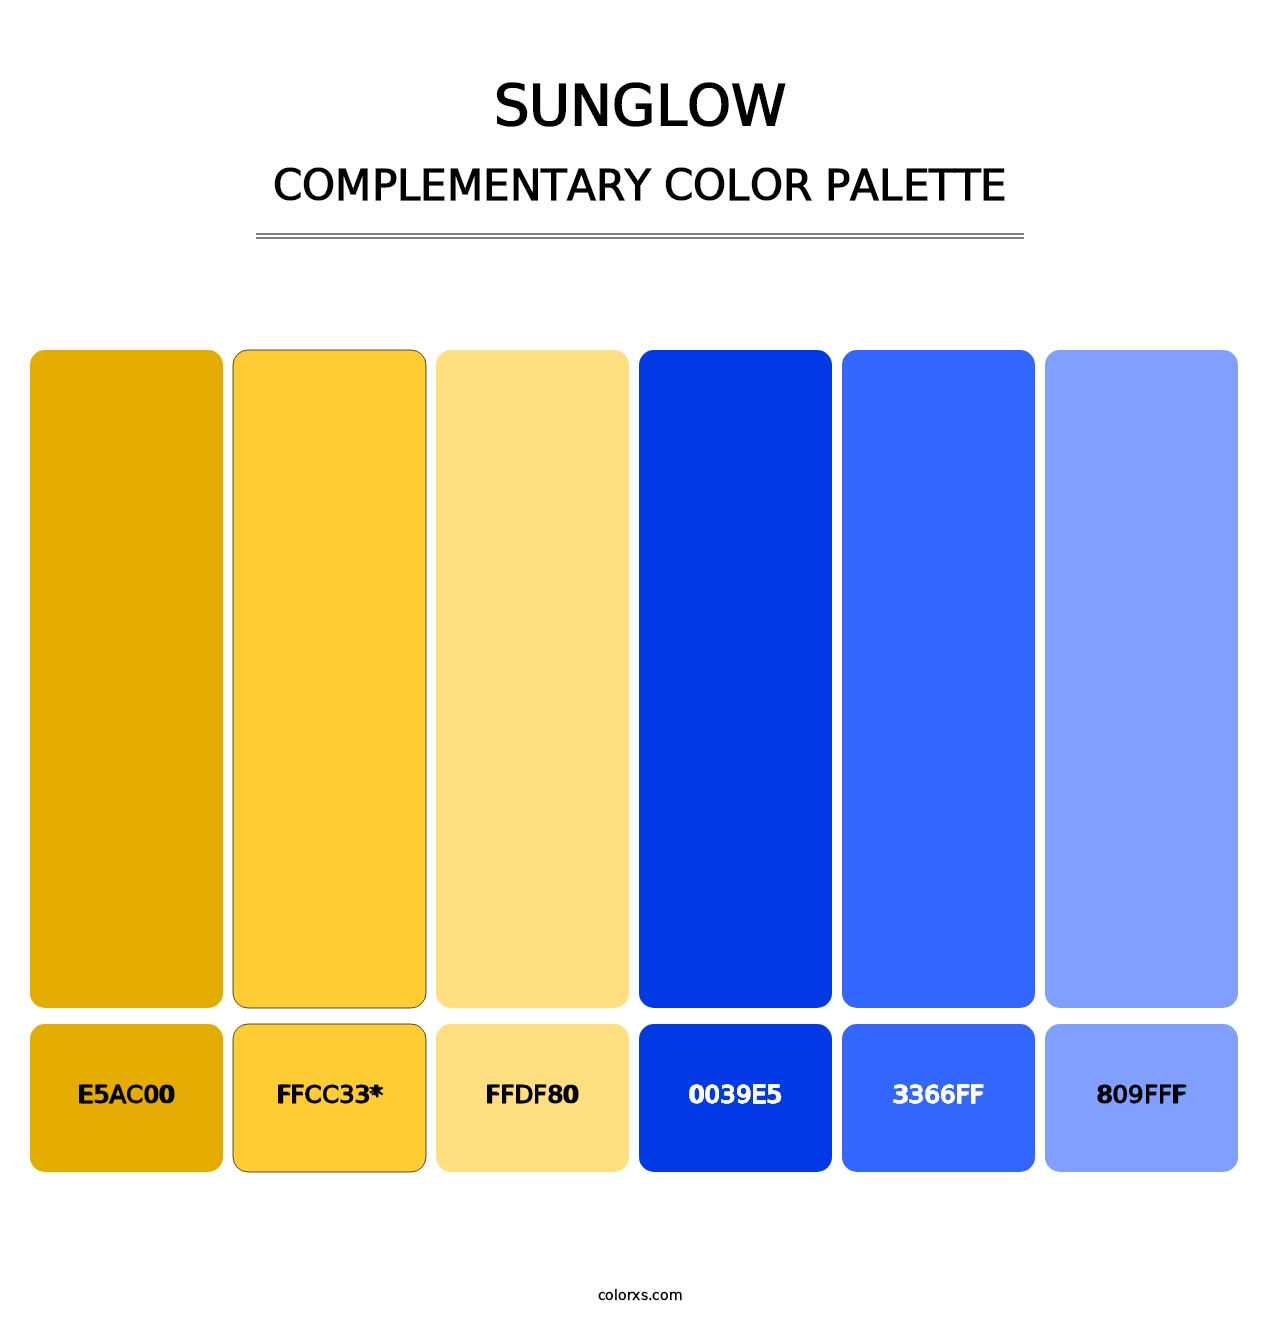 Sunglow - Complementary Color Palette